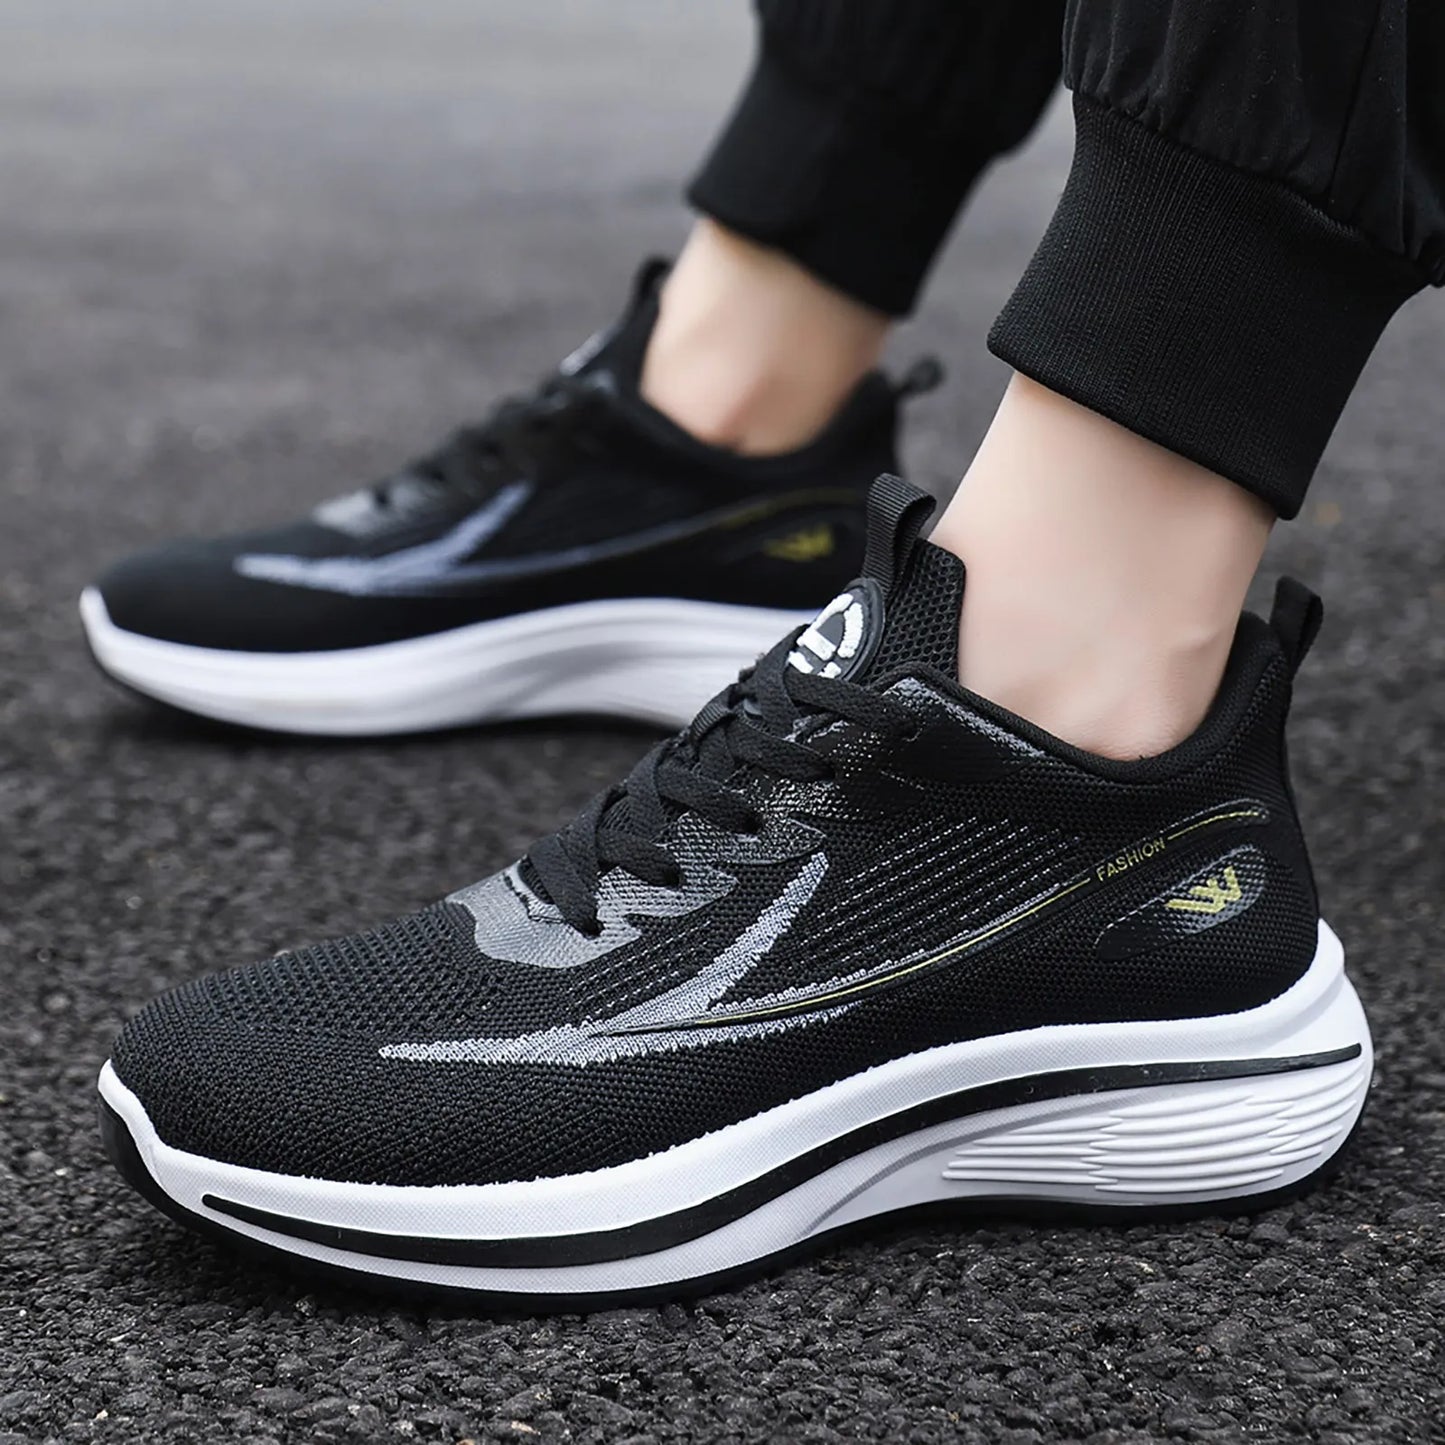 Men Sports Shoes Breathable Running Lightweight Sneakers/Woven Casual Air Mesh Sneaker Walking Vulcanized Shoes